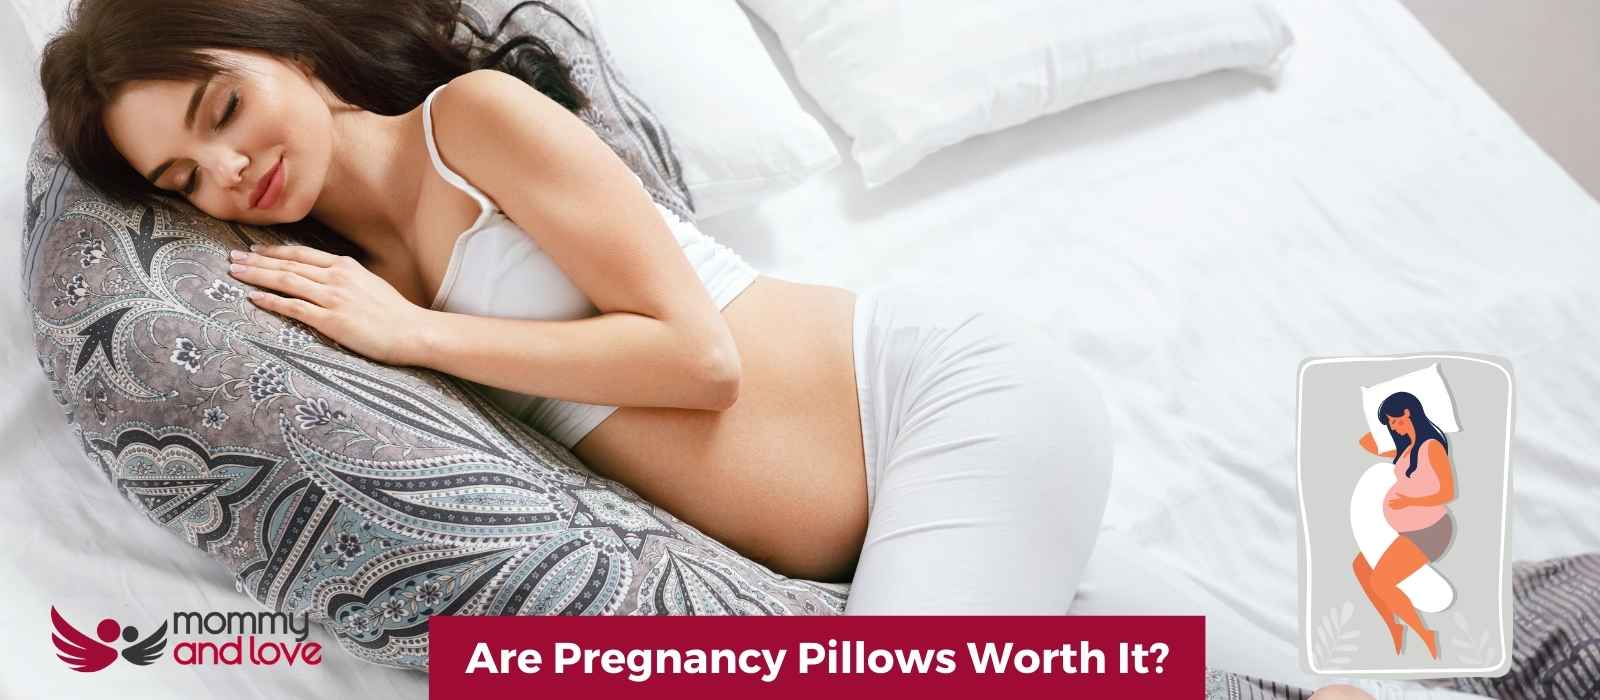 Are Pregnancy Pillows Worth It